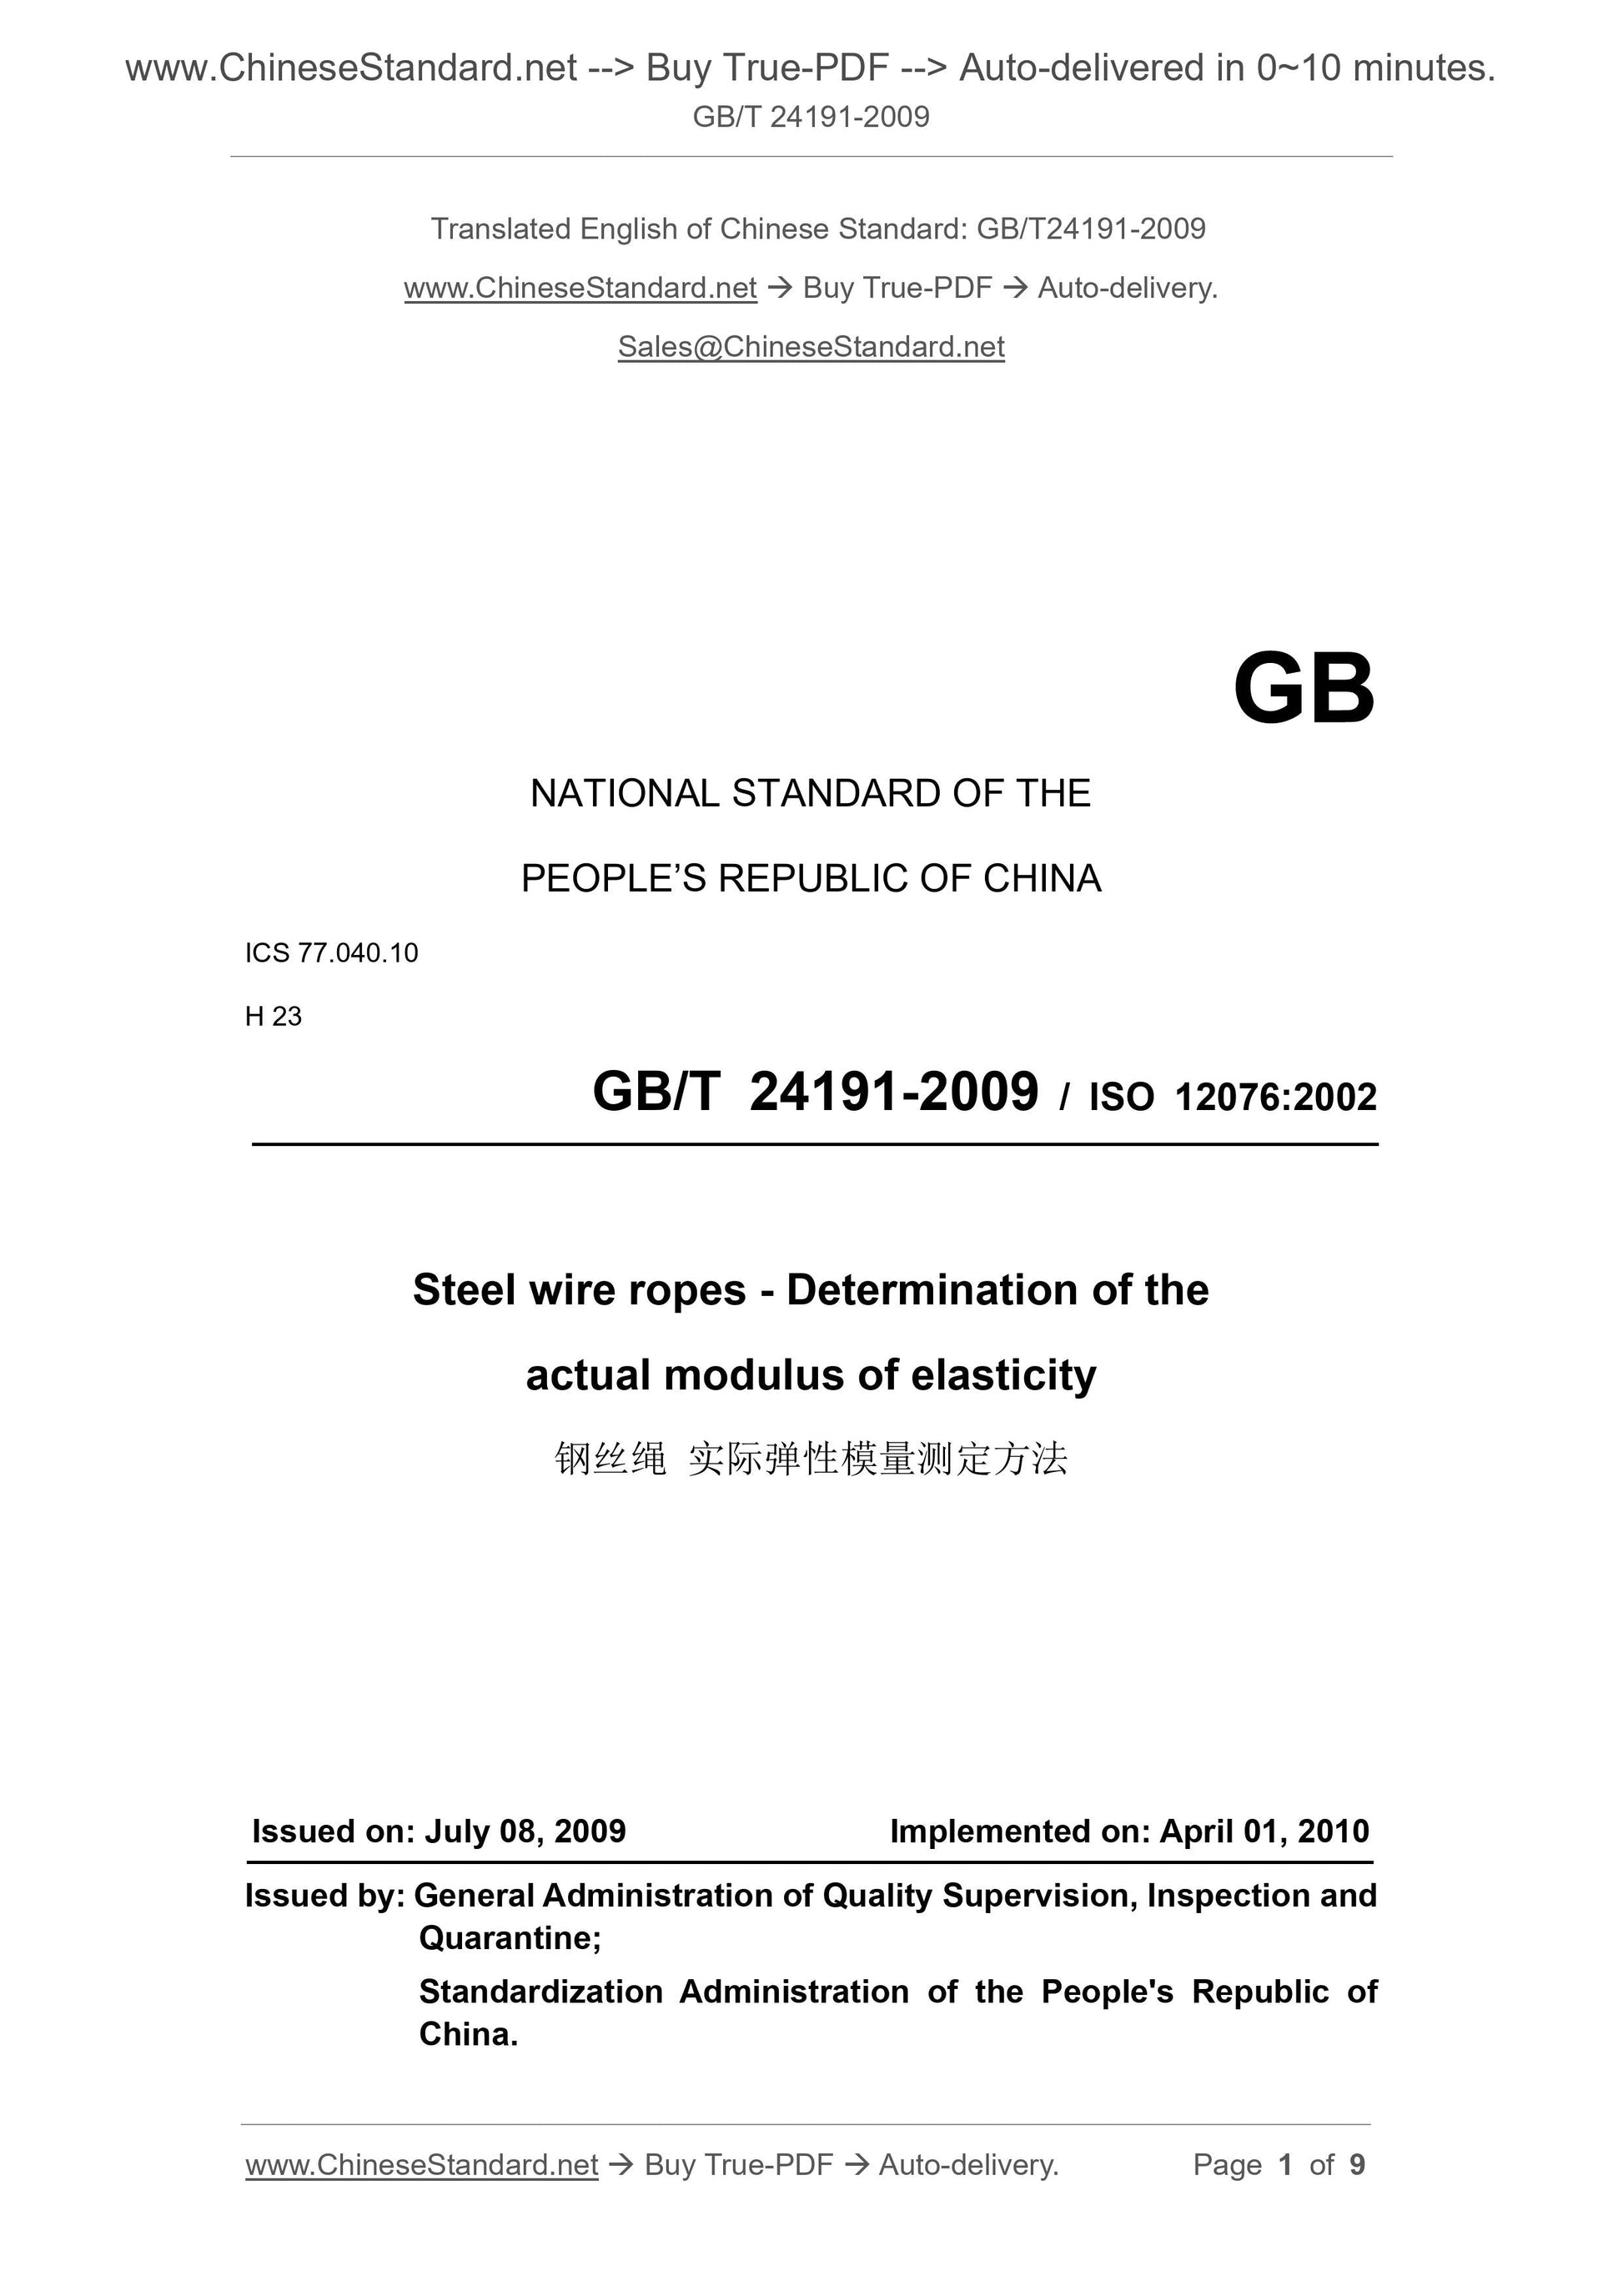 GB/T 24191-2009 Page 1